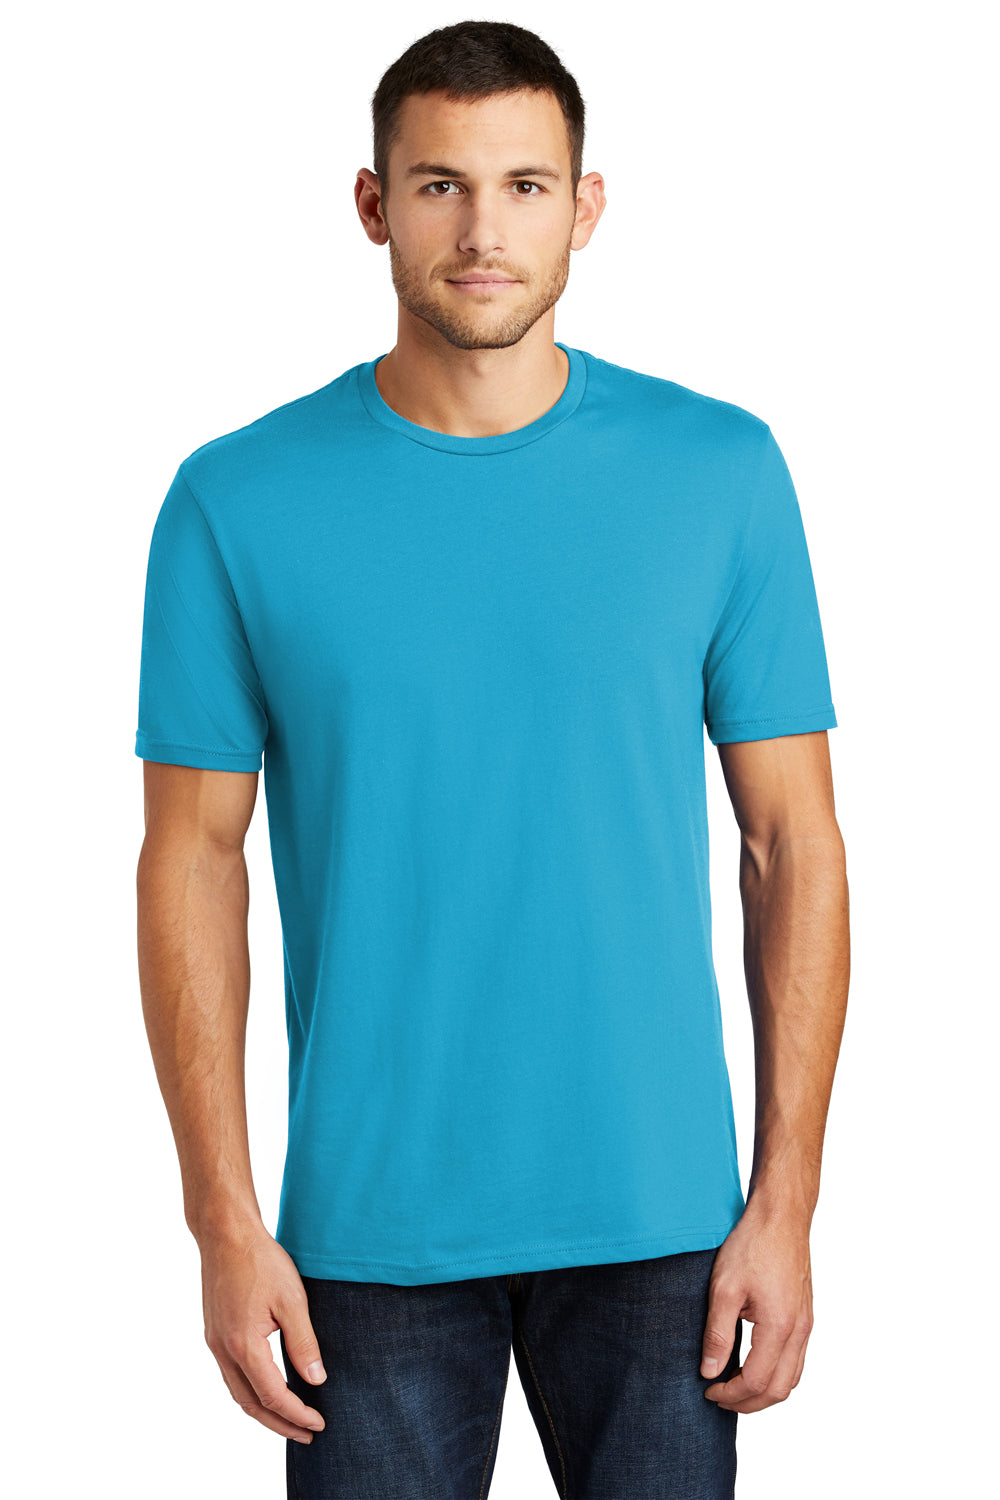 District DT104 Mens Perfect Weight Short Sleeve Crewneck T-Shirt Turquoise Blue Front